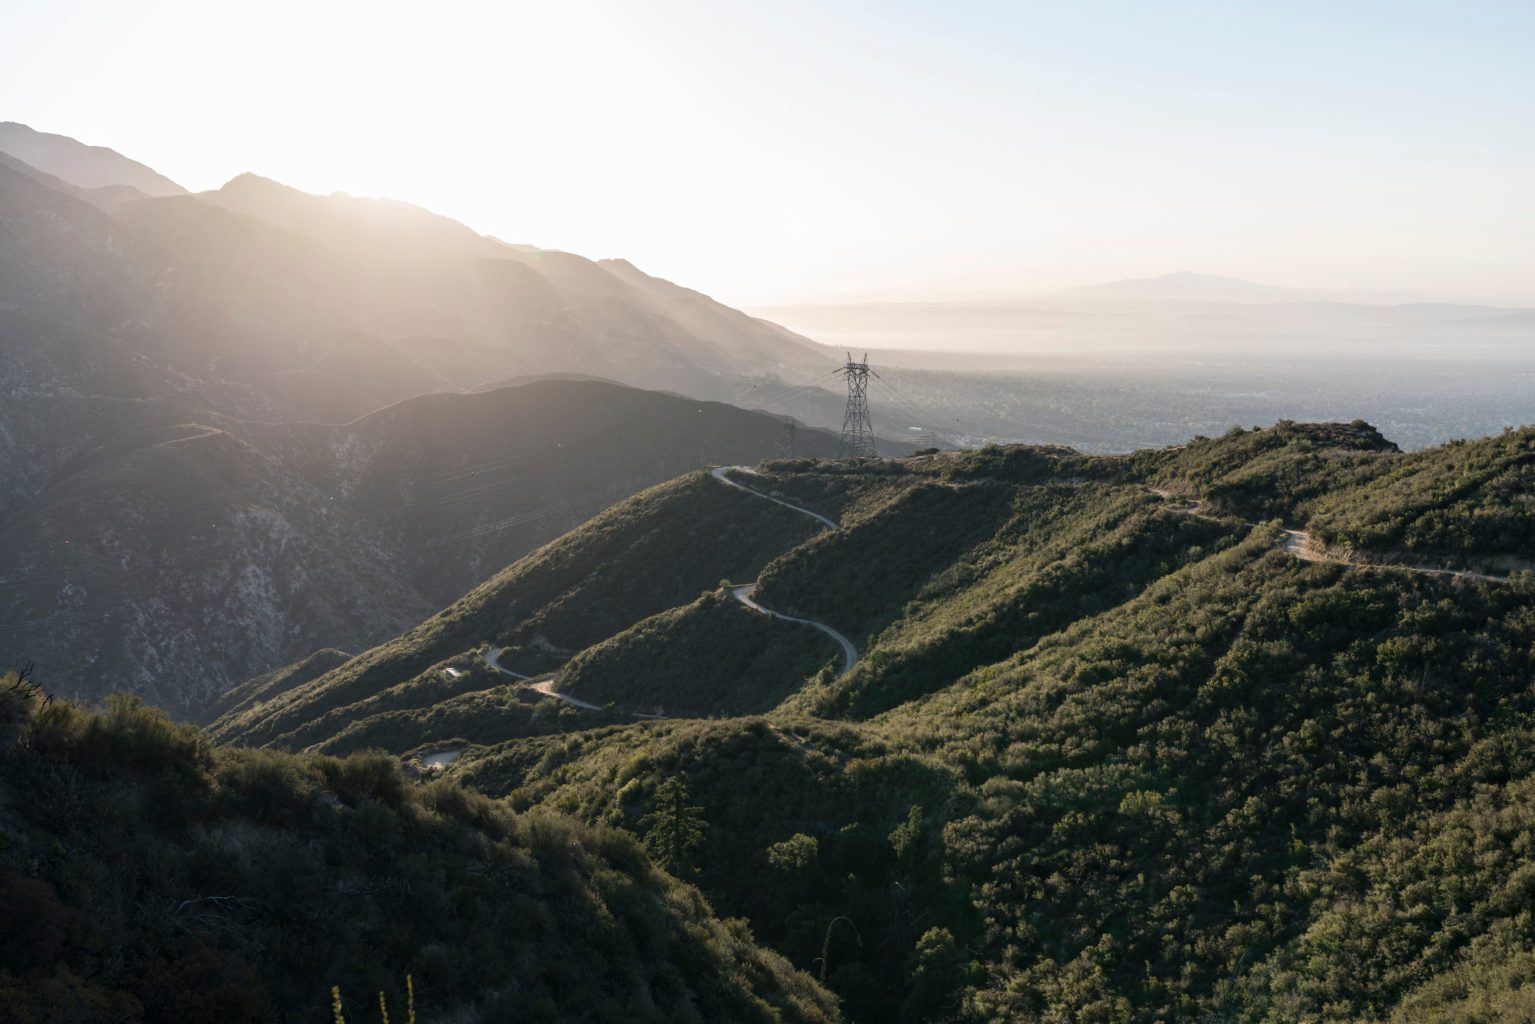 Morning view of Mt Lukens Truck Trail fire road and Mt Wilson in the San Gabriel Mountains near Pasadena and Los Angeles California.